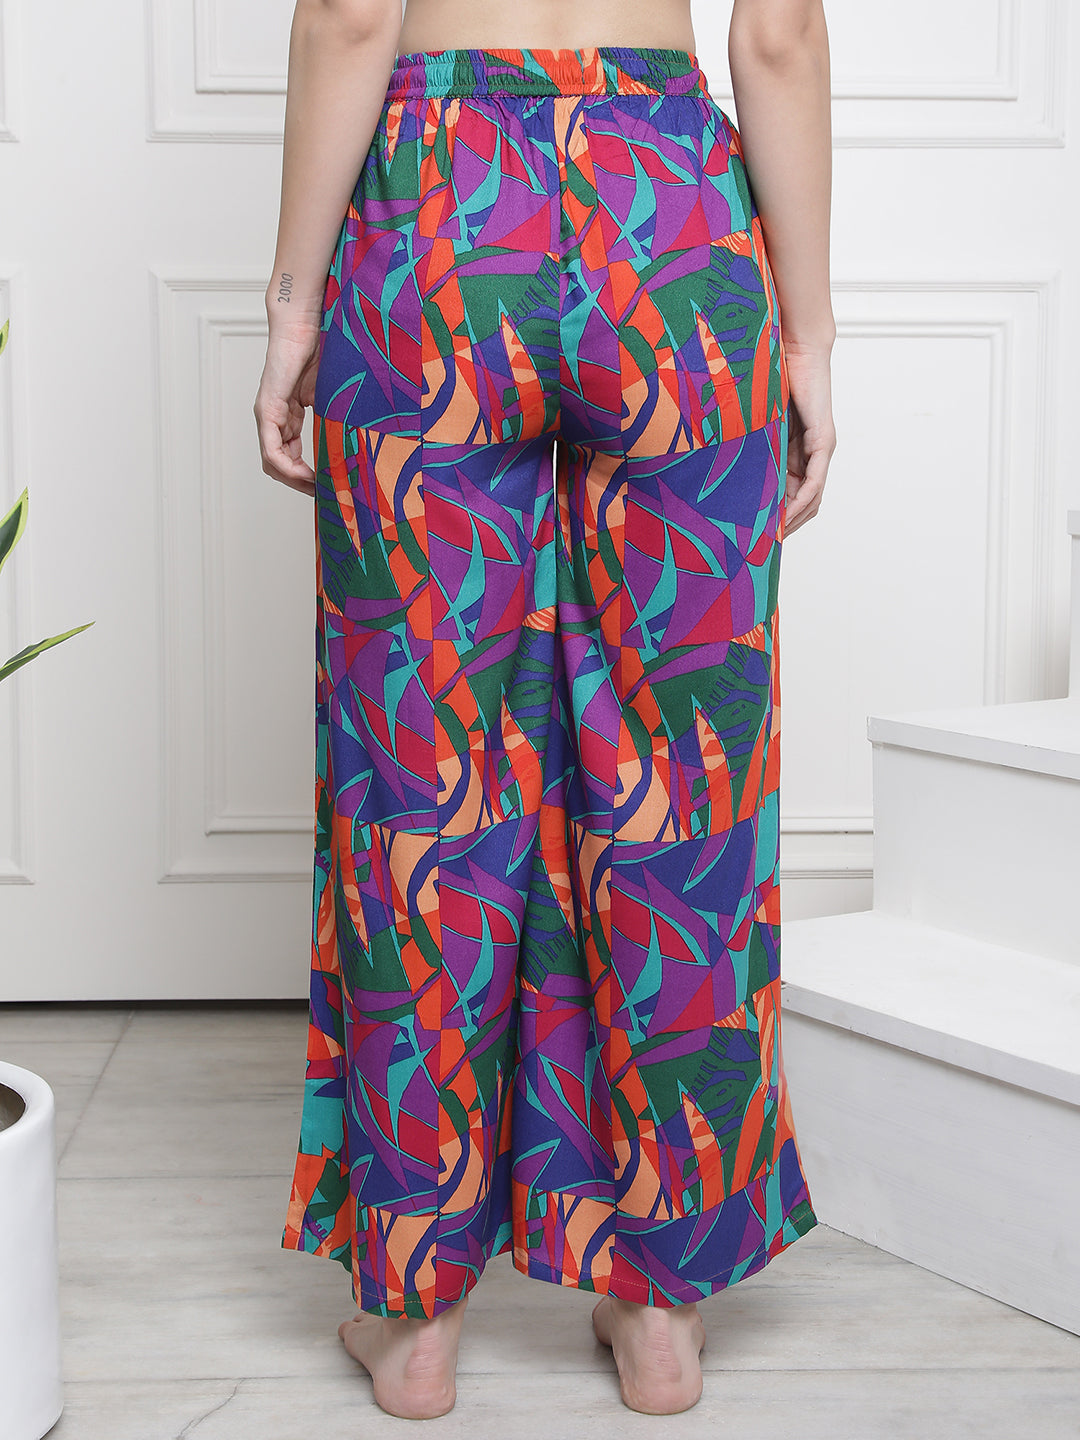 Multi Color Abstract Printed Cotton Lower For Women Claura Designs Pvt. Ltd. Lounge Wear Abstract, Cotton, Lounge Pant, Loungepant_size, Lower, multi color, Pajama, Printed